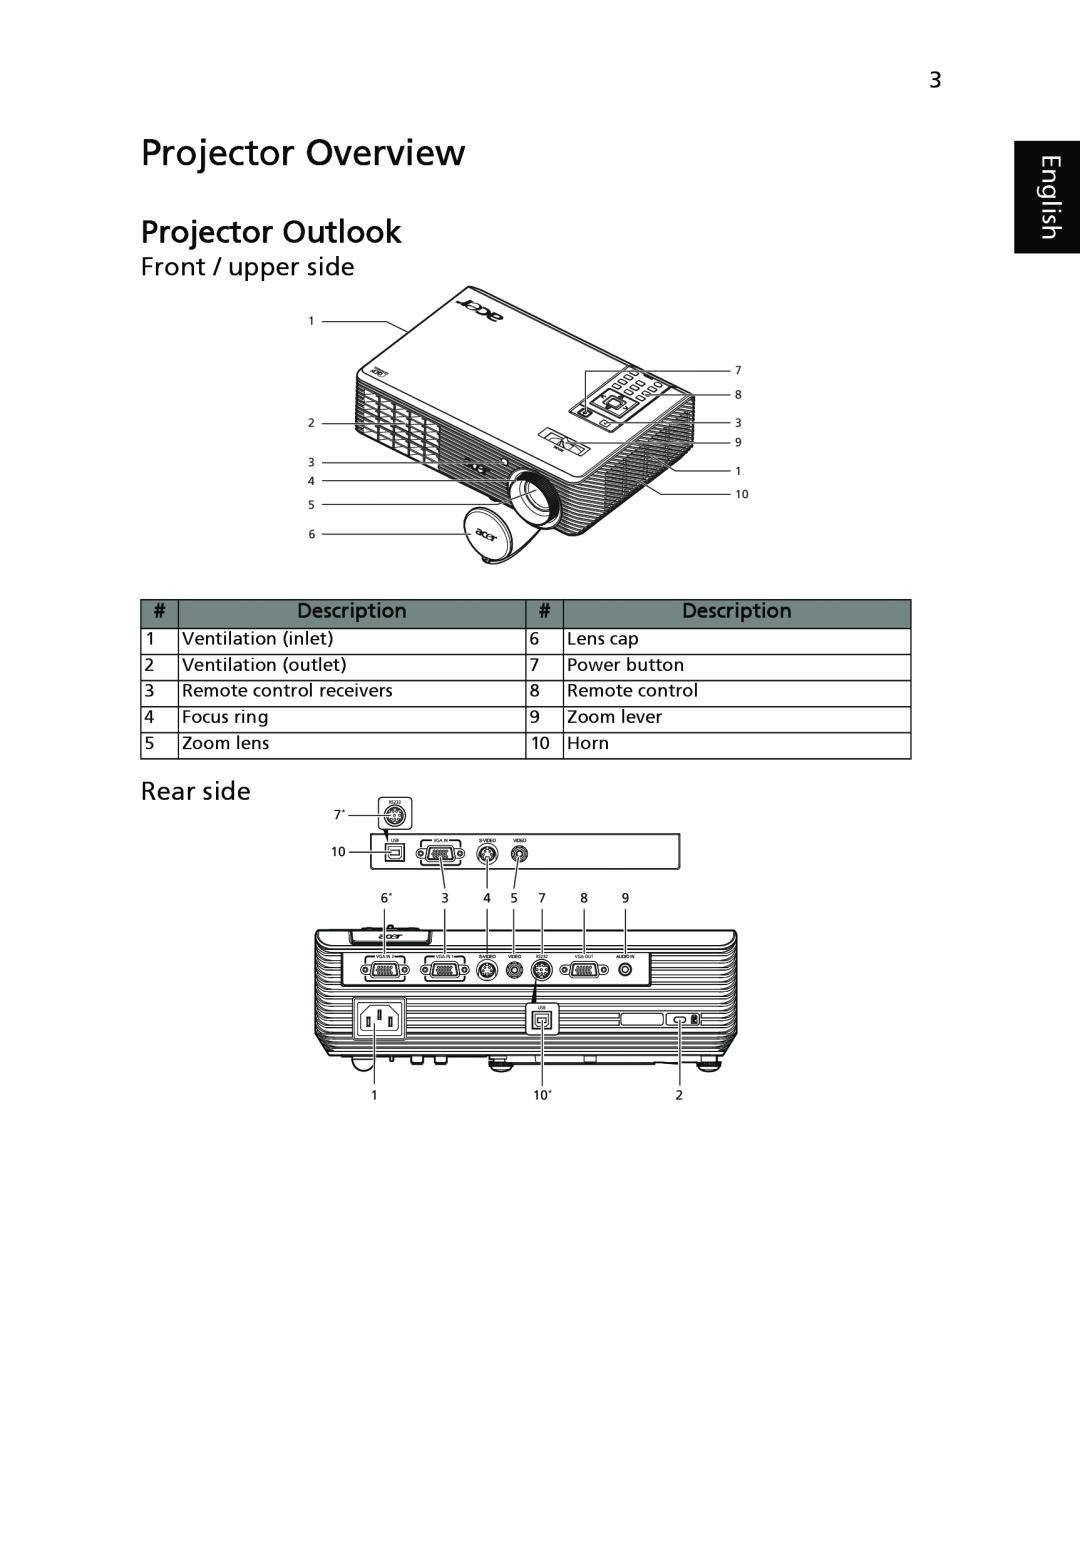 Acer X1161A, X1261, X1161N manual Projector Overview, Projector Outlook, Front / upper side, Rear side, Description, English 